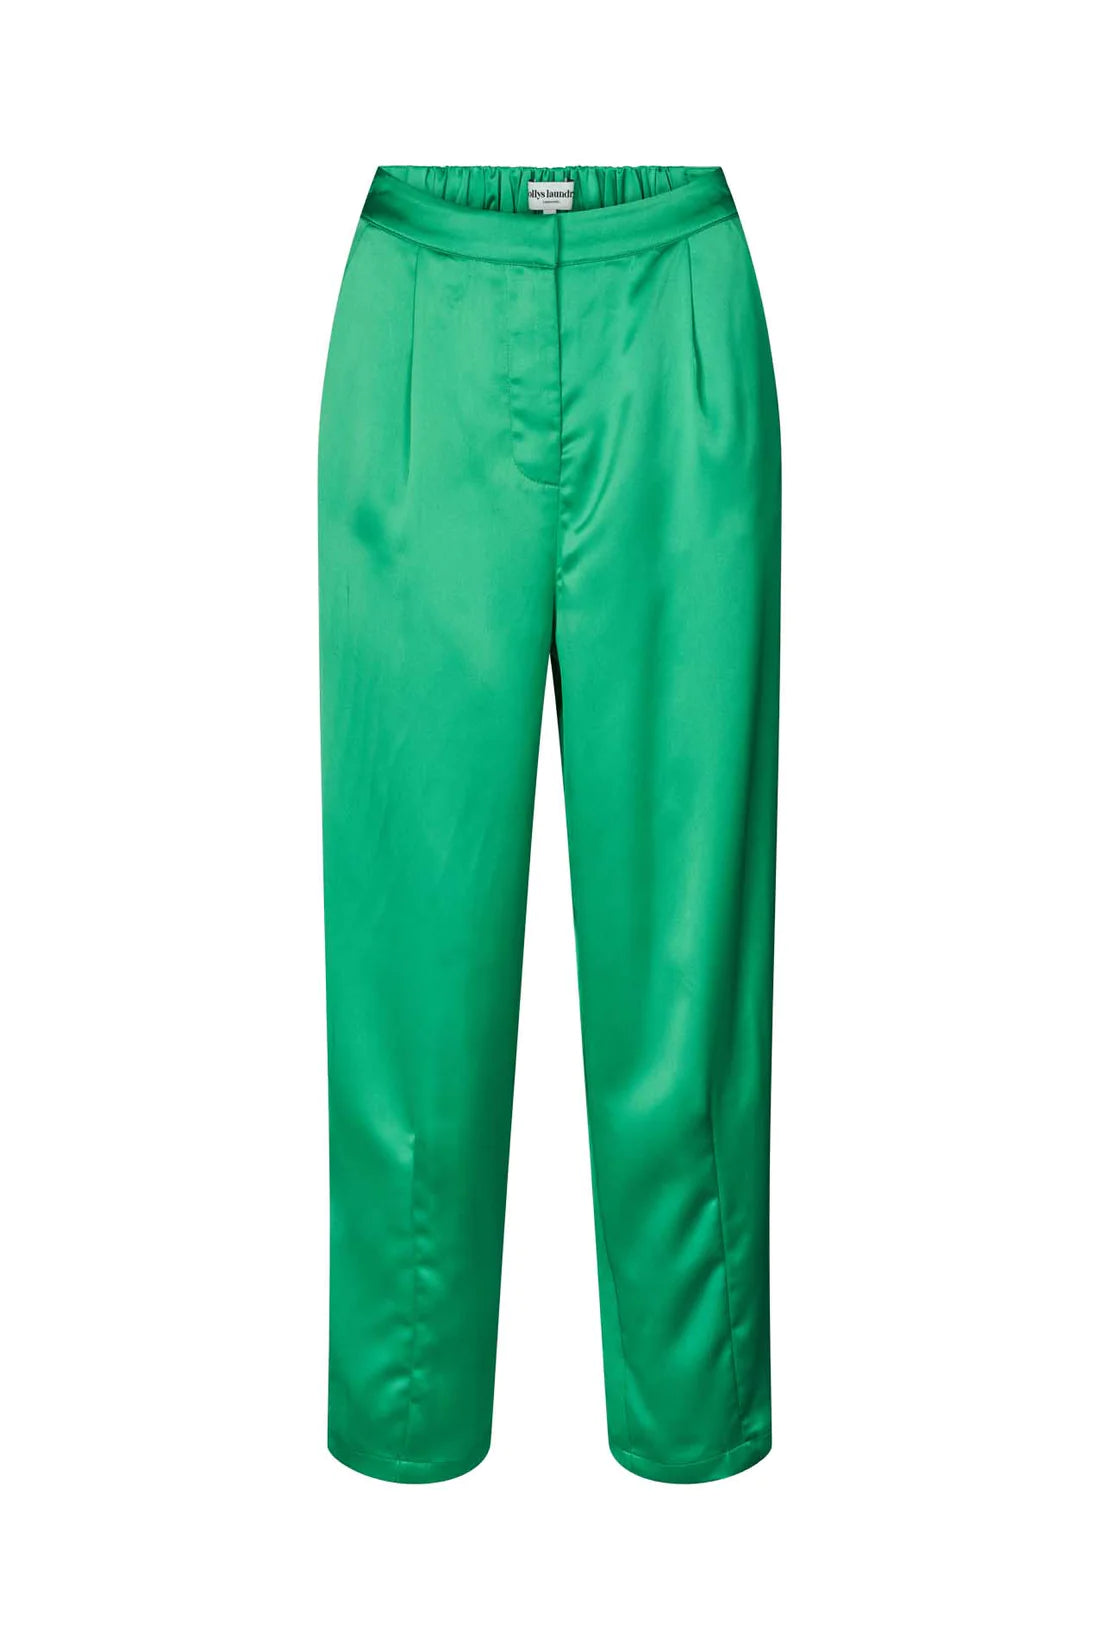 Lollys Laundry Maisie Satin Trousers - Green